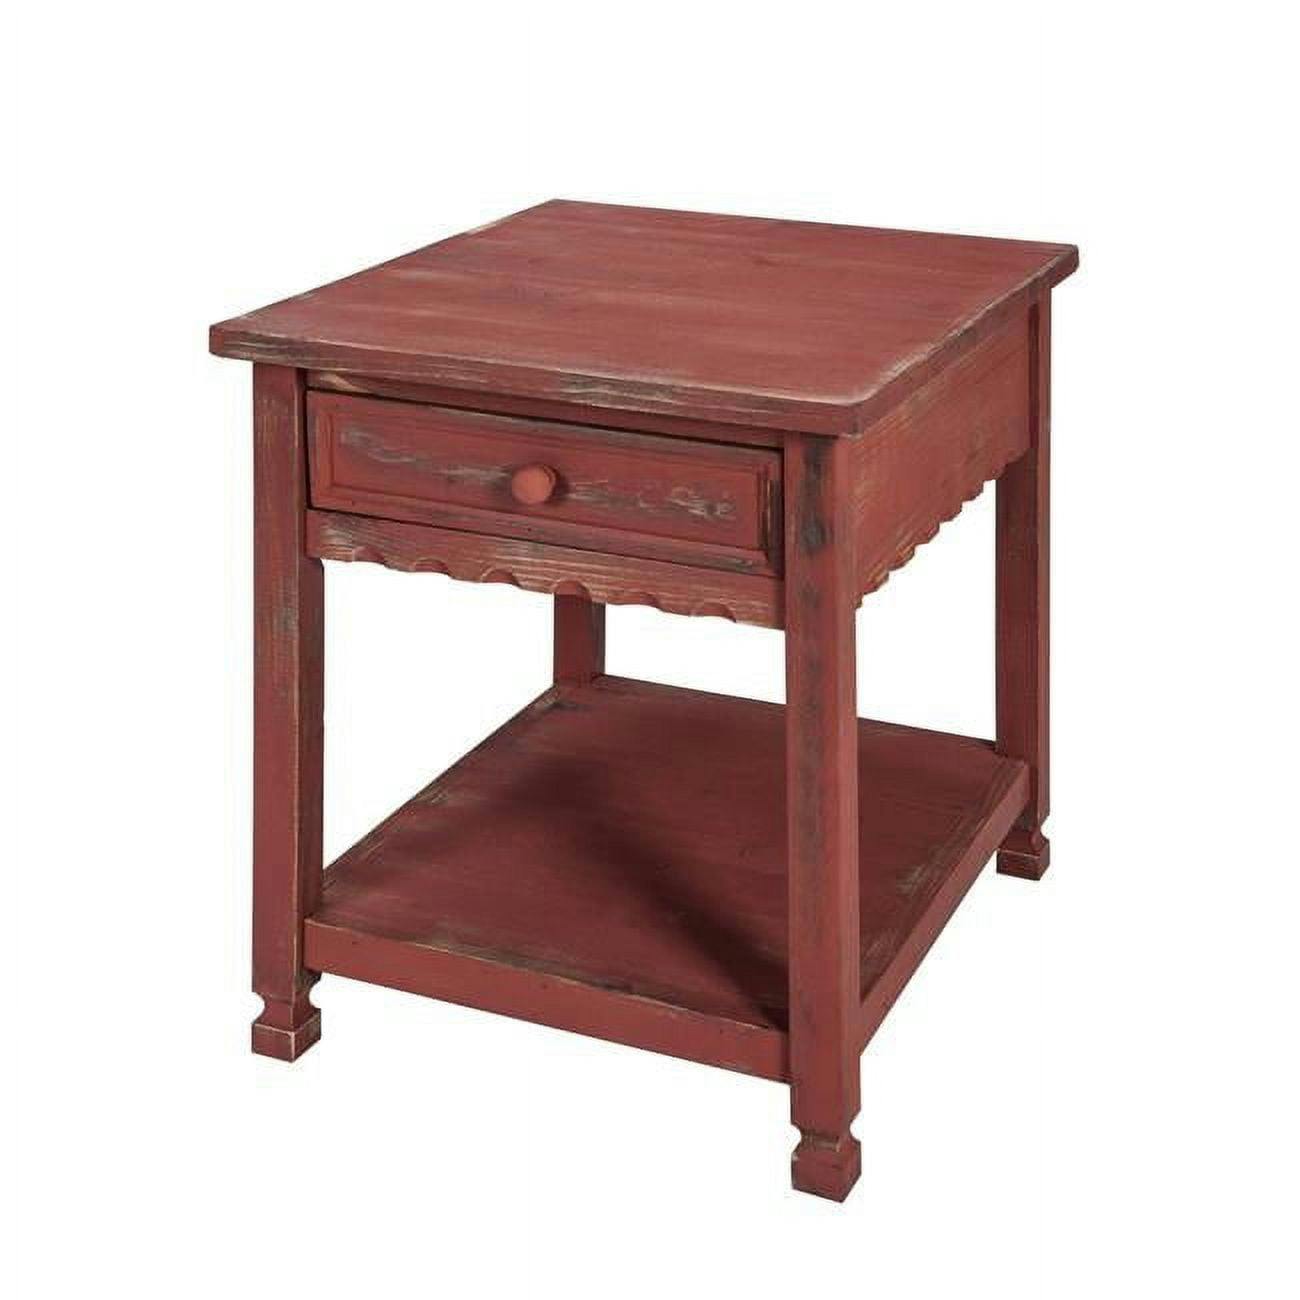 Rustic Red Antique Finish Cottage End Table with Storage